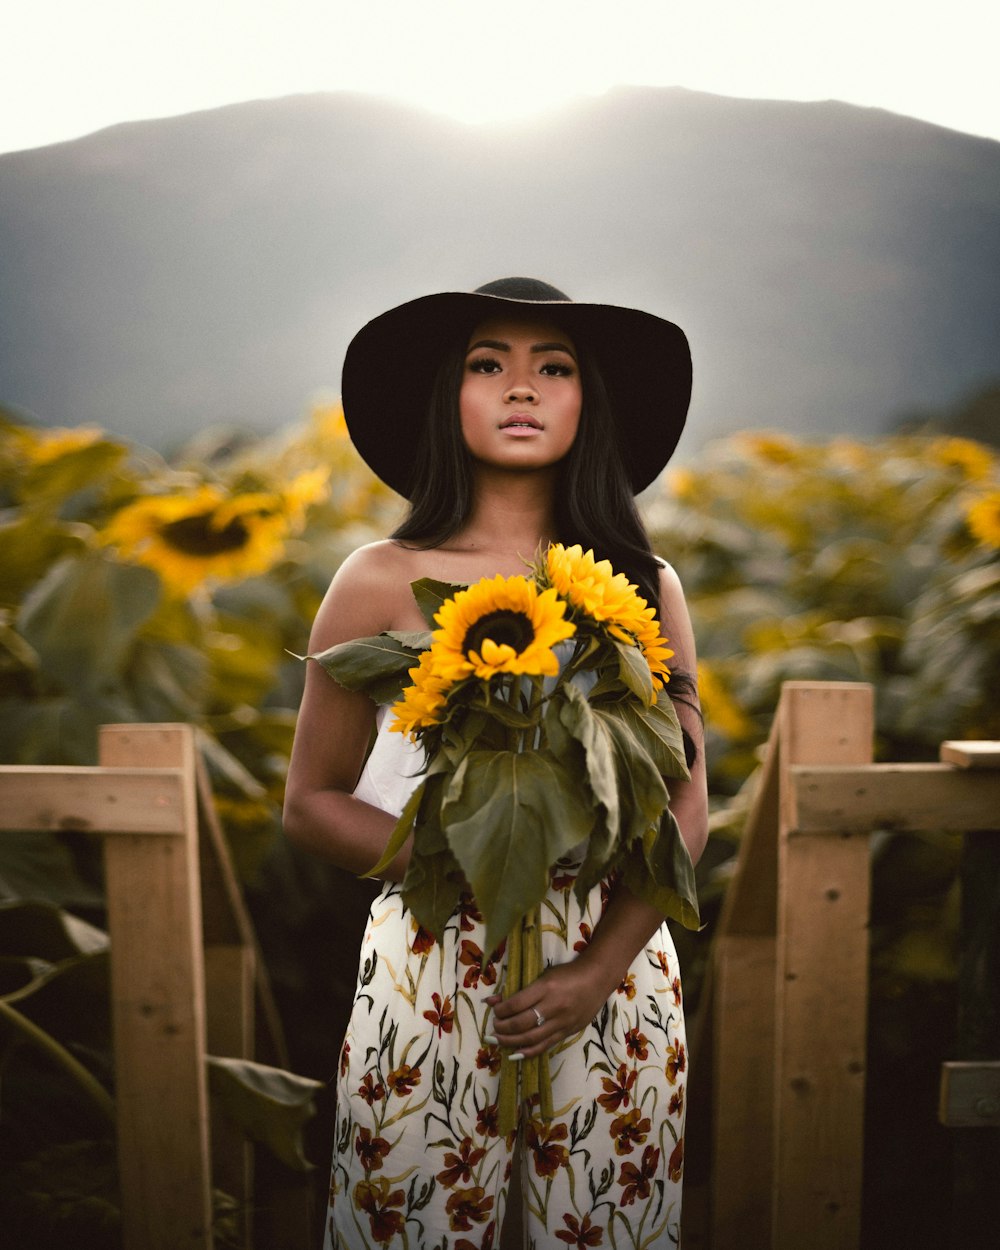 a woman wearing a hat holding a sunflower